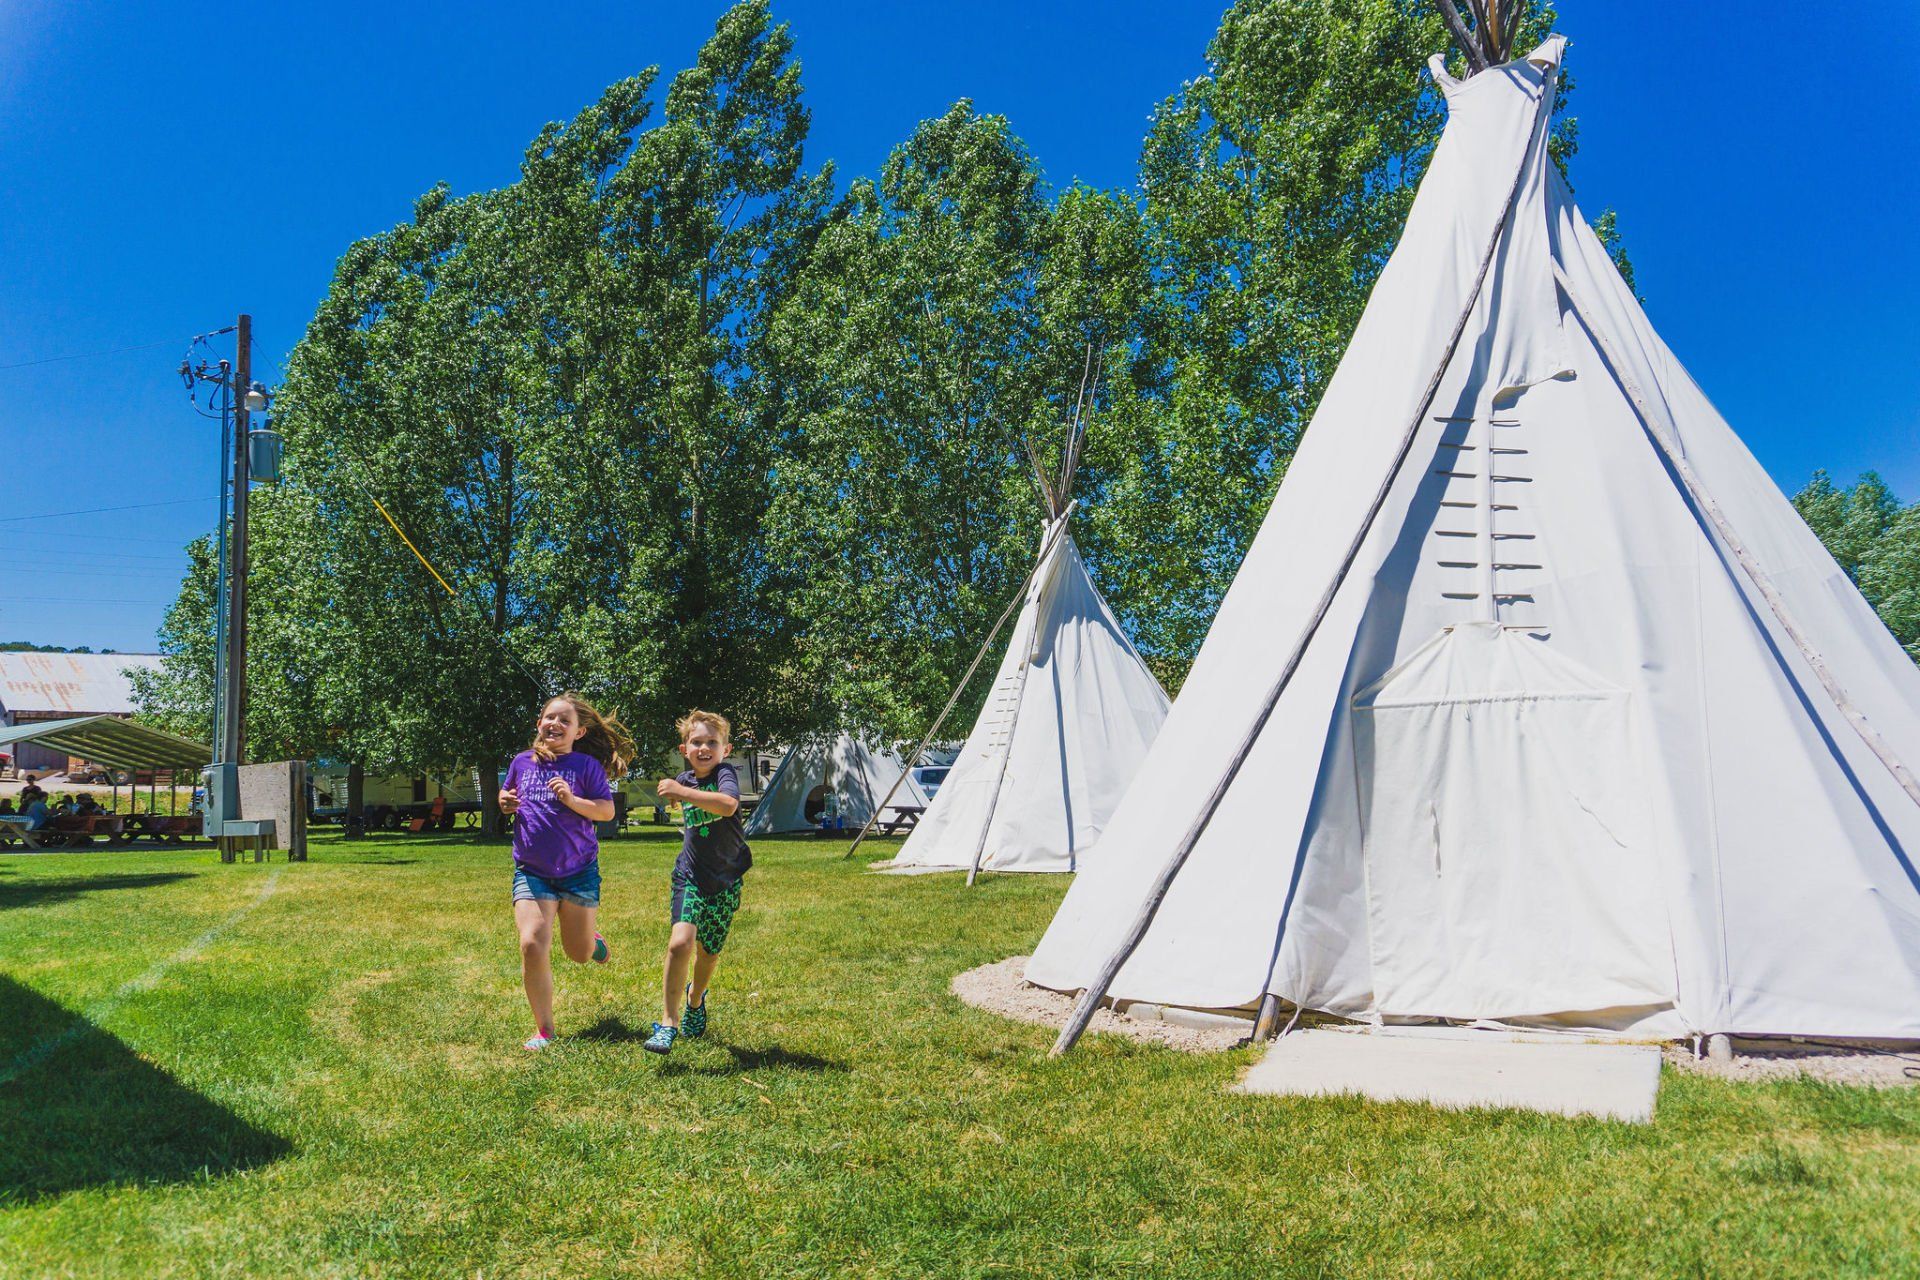 Teepees for rent at Downata Hot Springs in Idaho